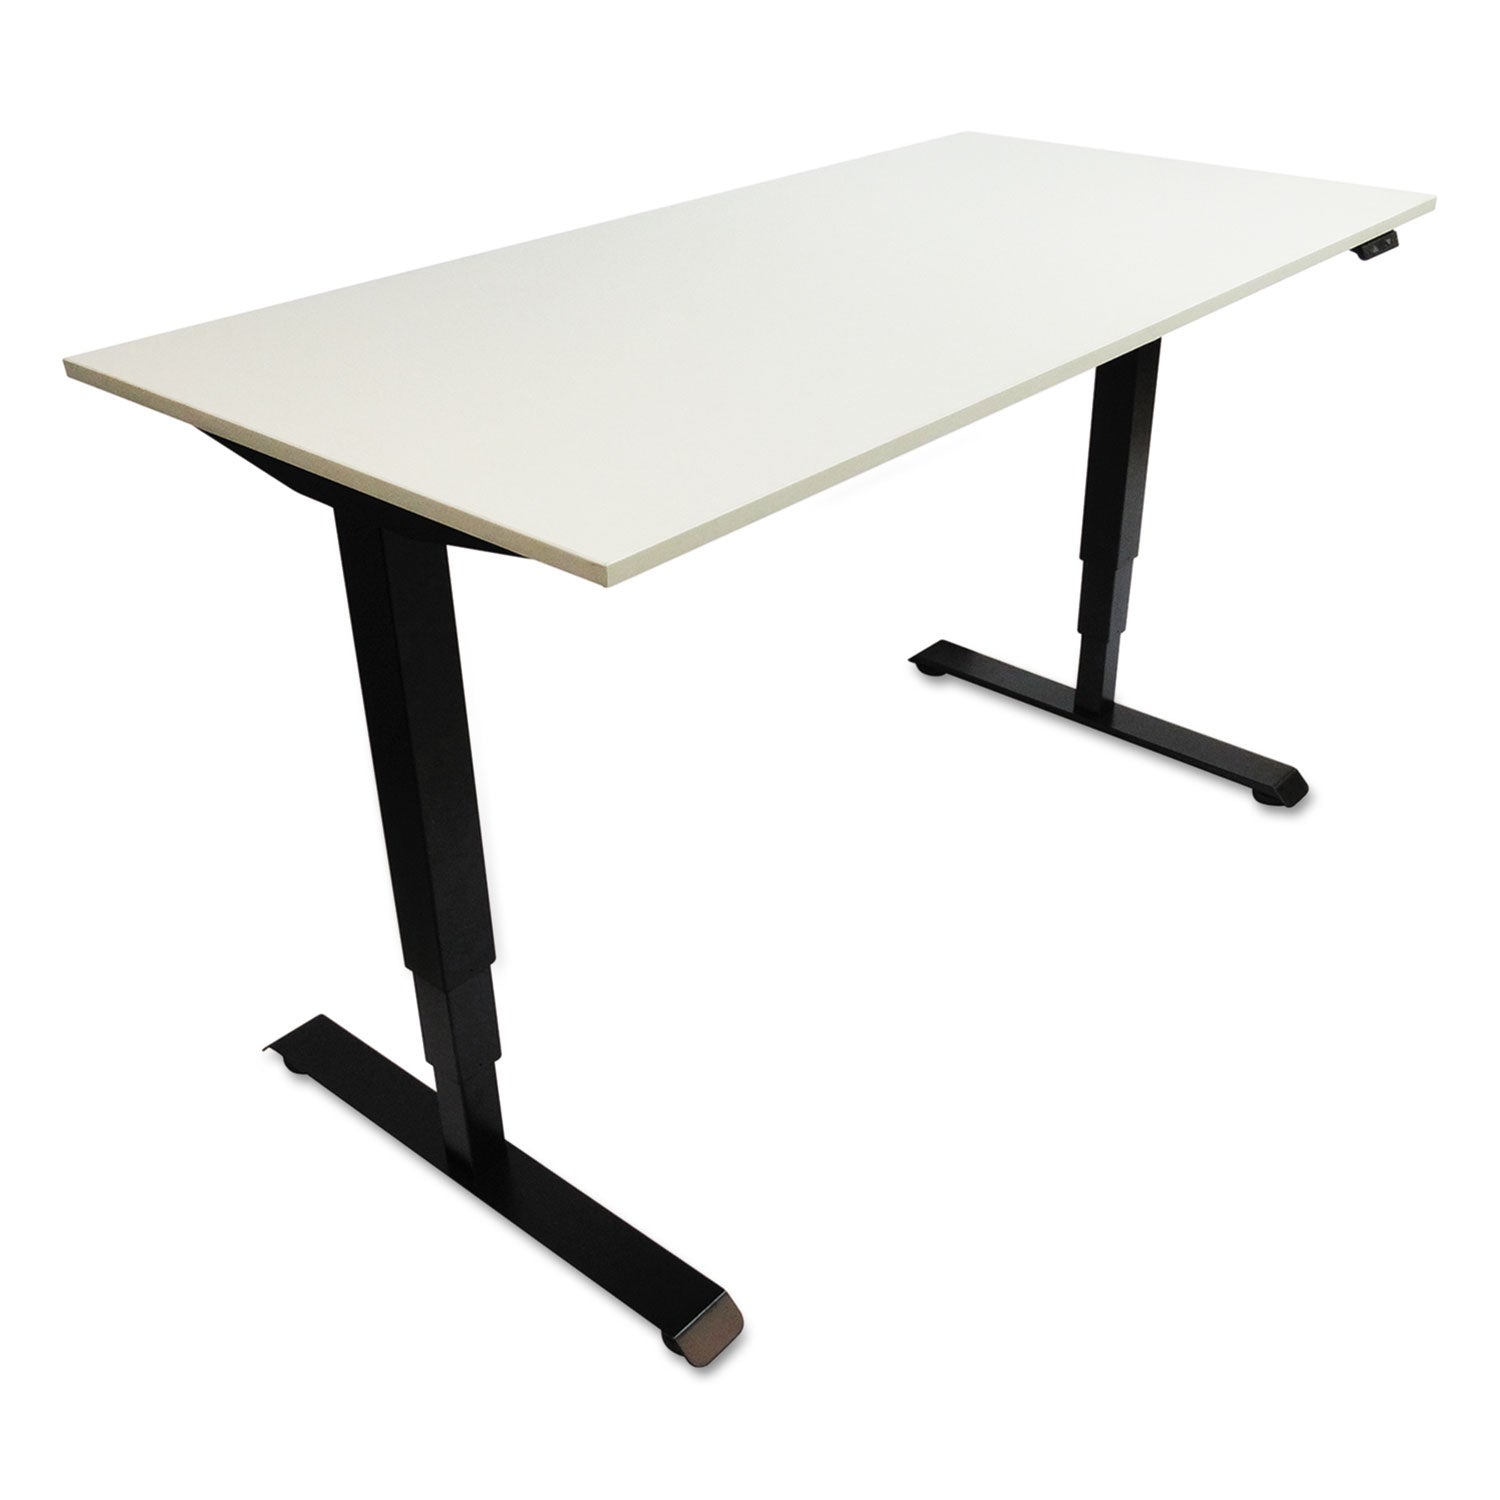 adaptivergo-sit-stand-3-stage-electric-height-adjustable-table-base-with-memory-control-4806-x-2435-x-25-to-507black_aleht3sab - 6